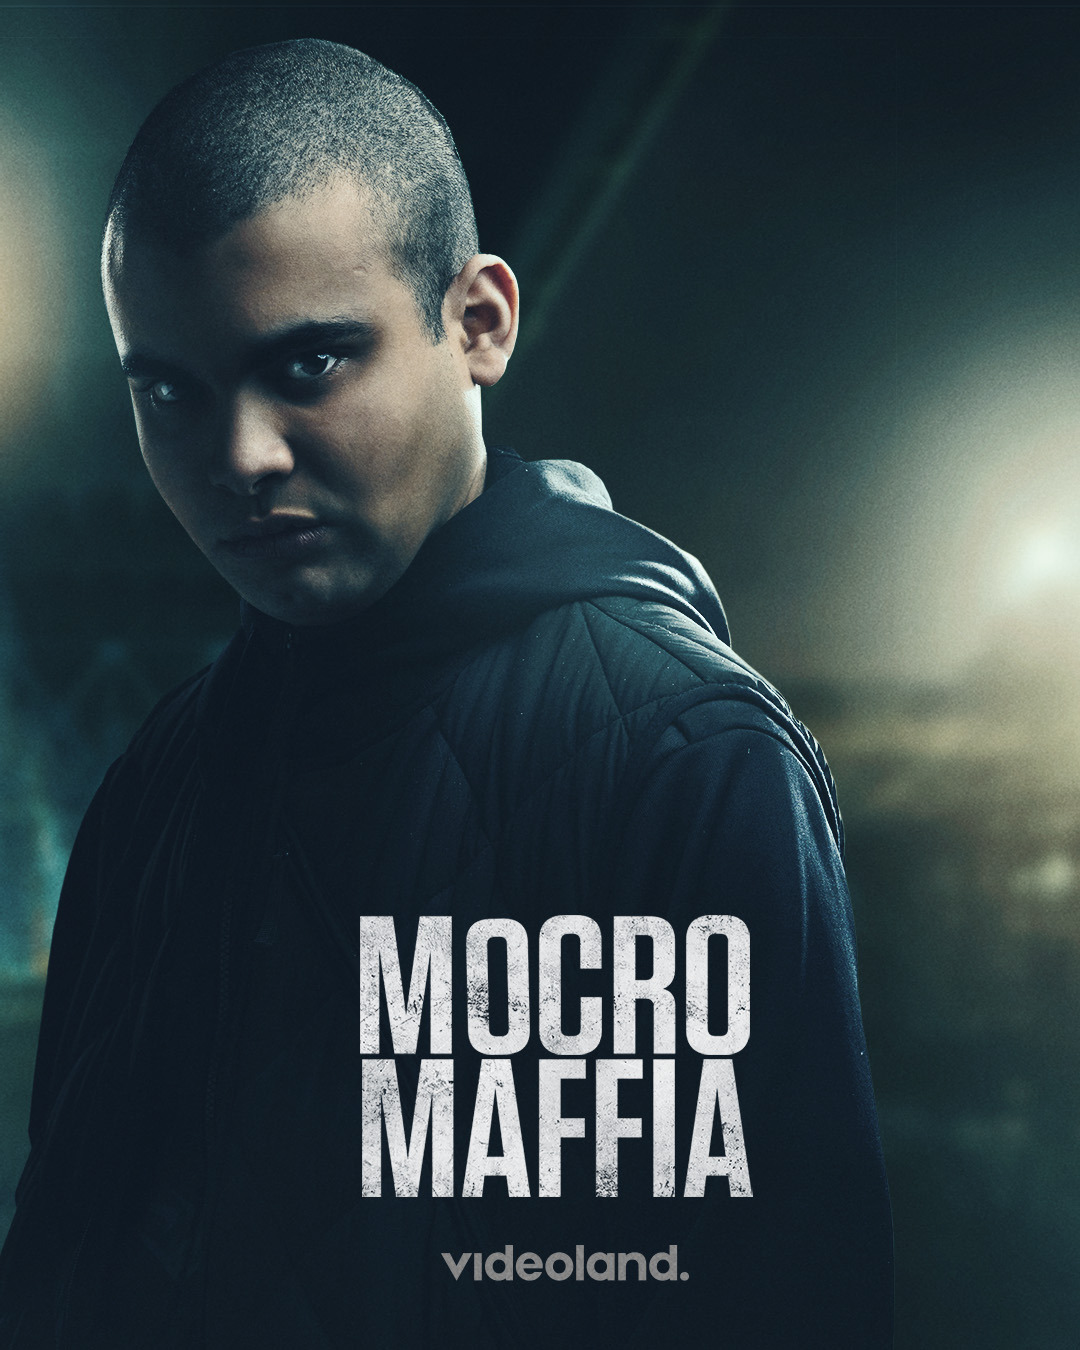 Extra Large TV Poster Image for Mocro maffia (#4 of 11)